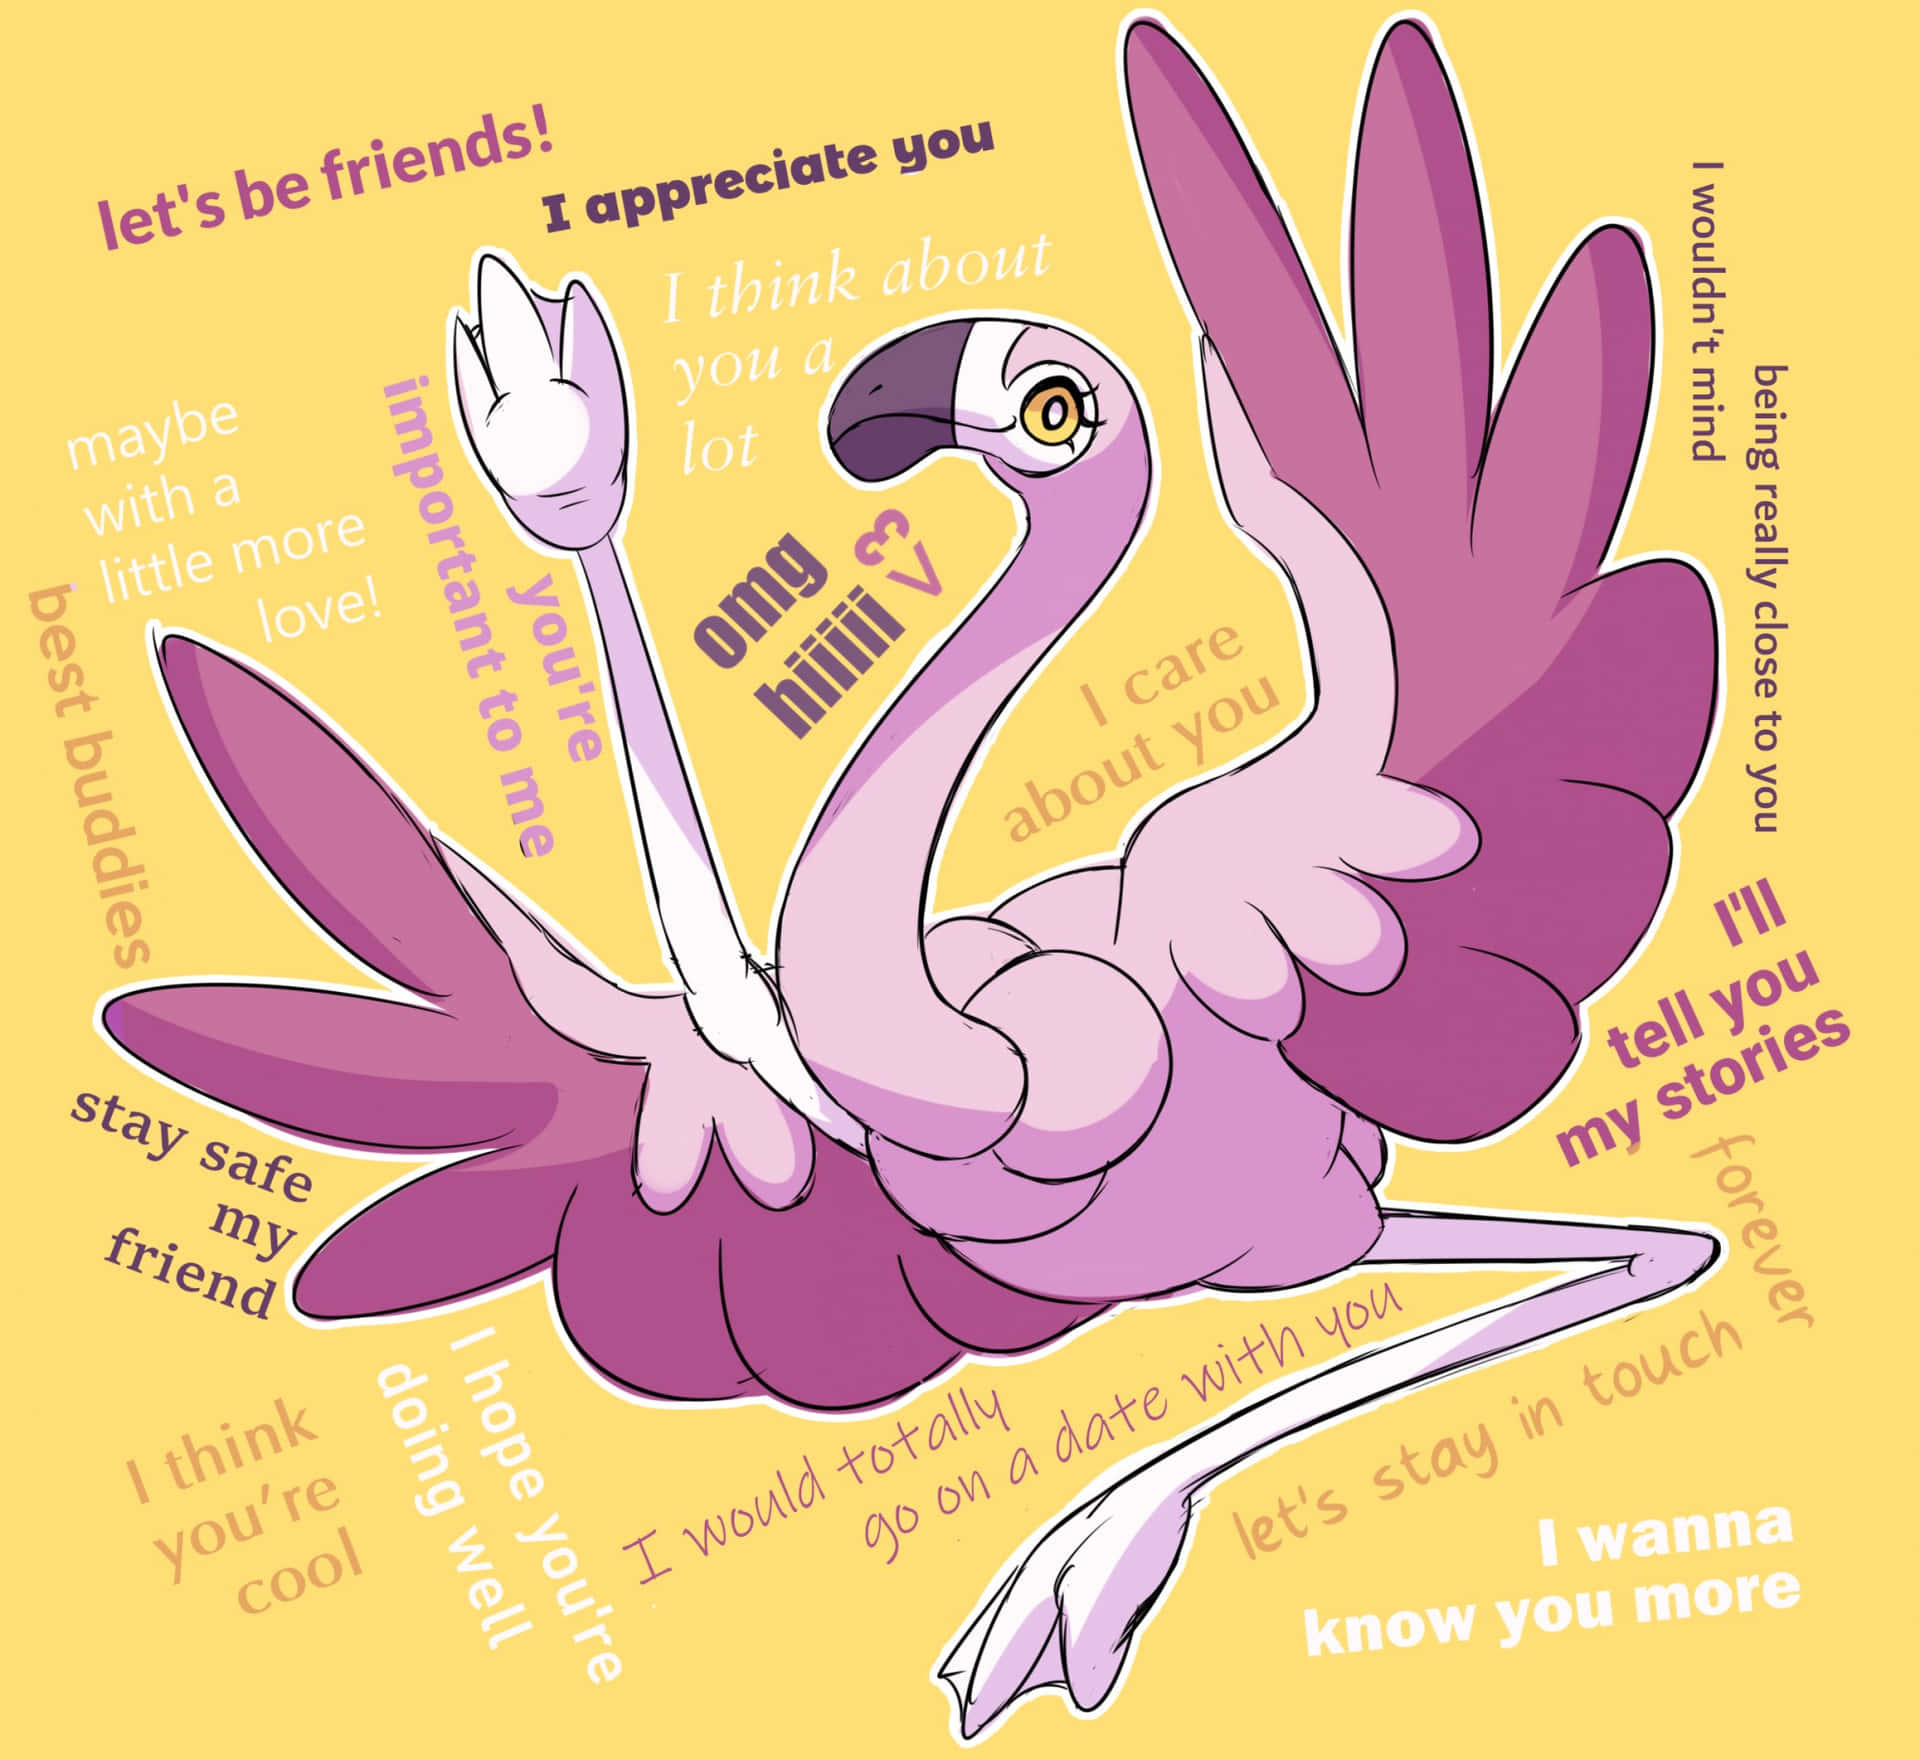 Affectionate Flamingo Expressions Wallpaper